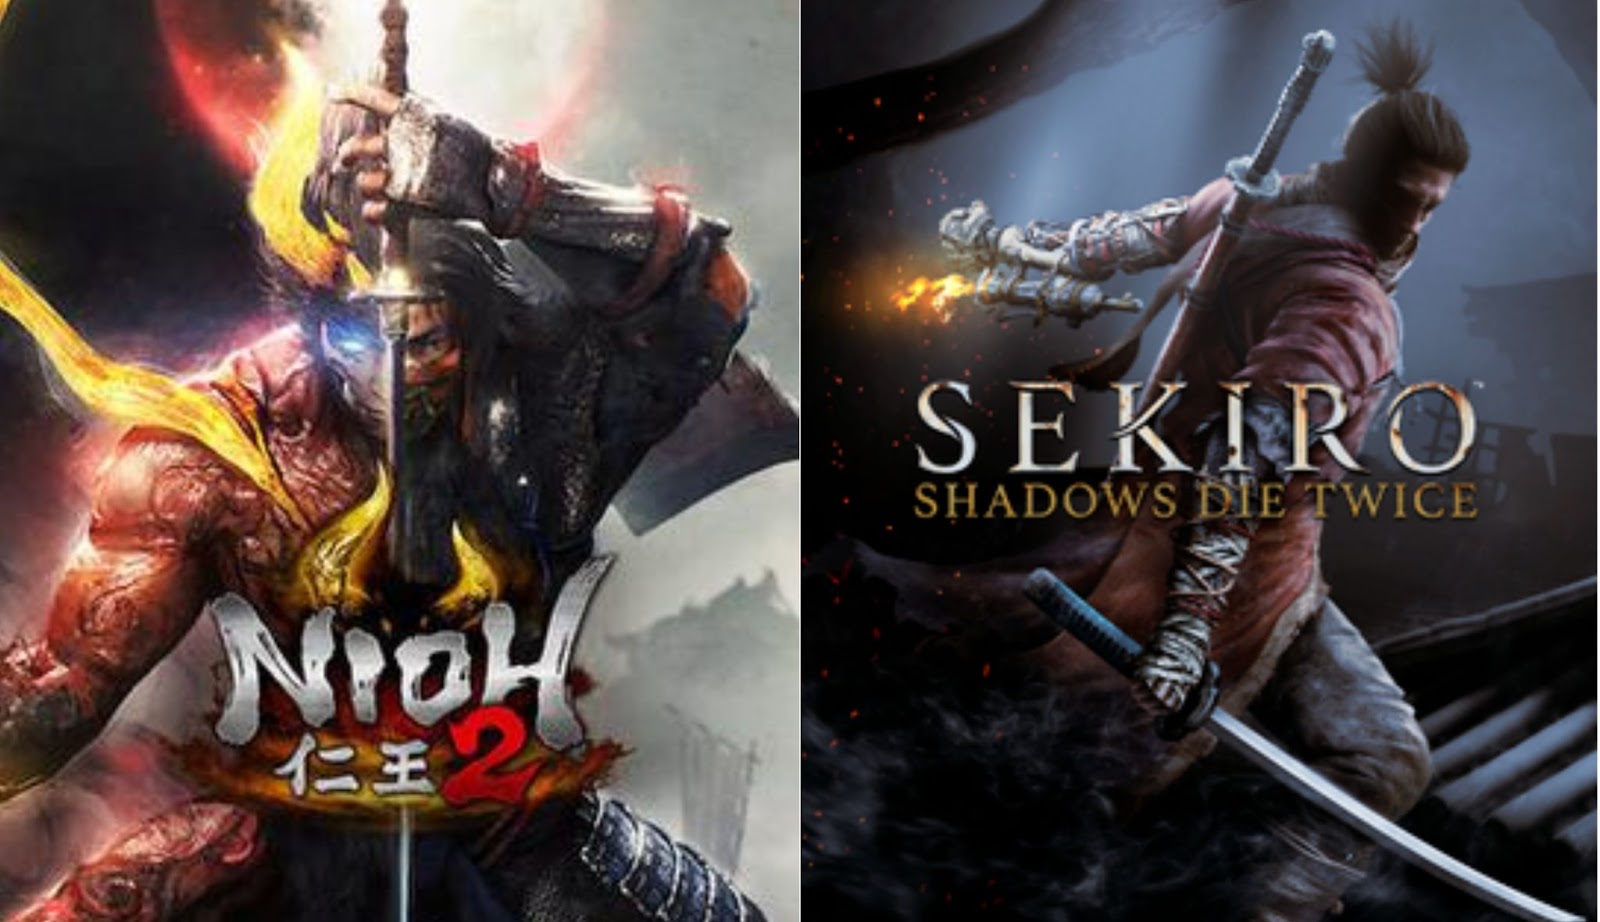 From Software Has Two New Games Planned For Release After Sekiro